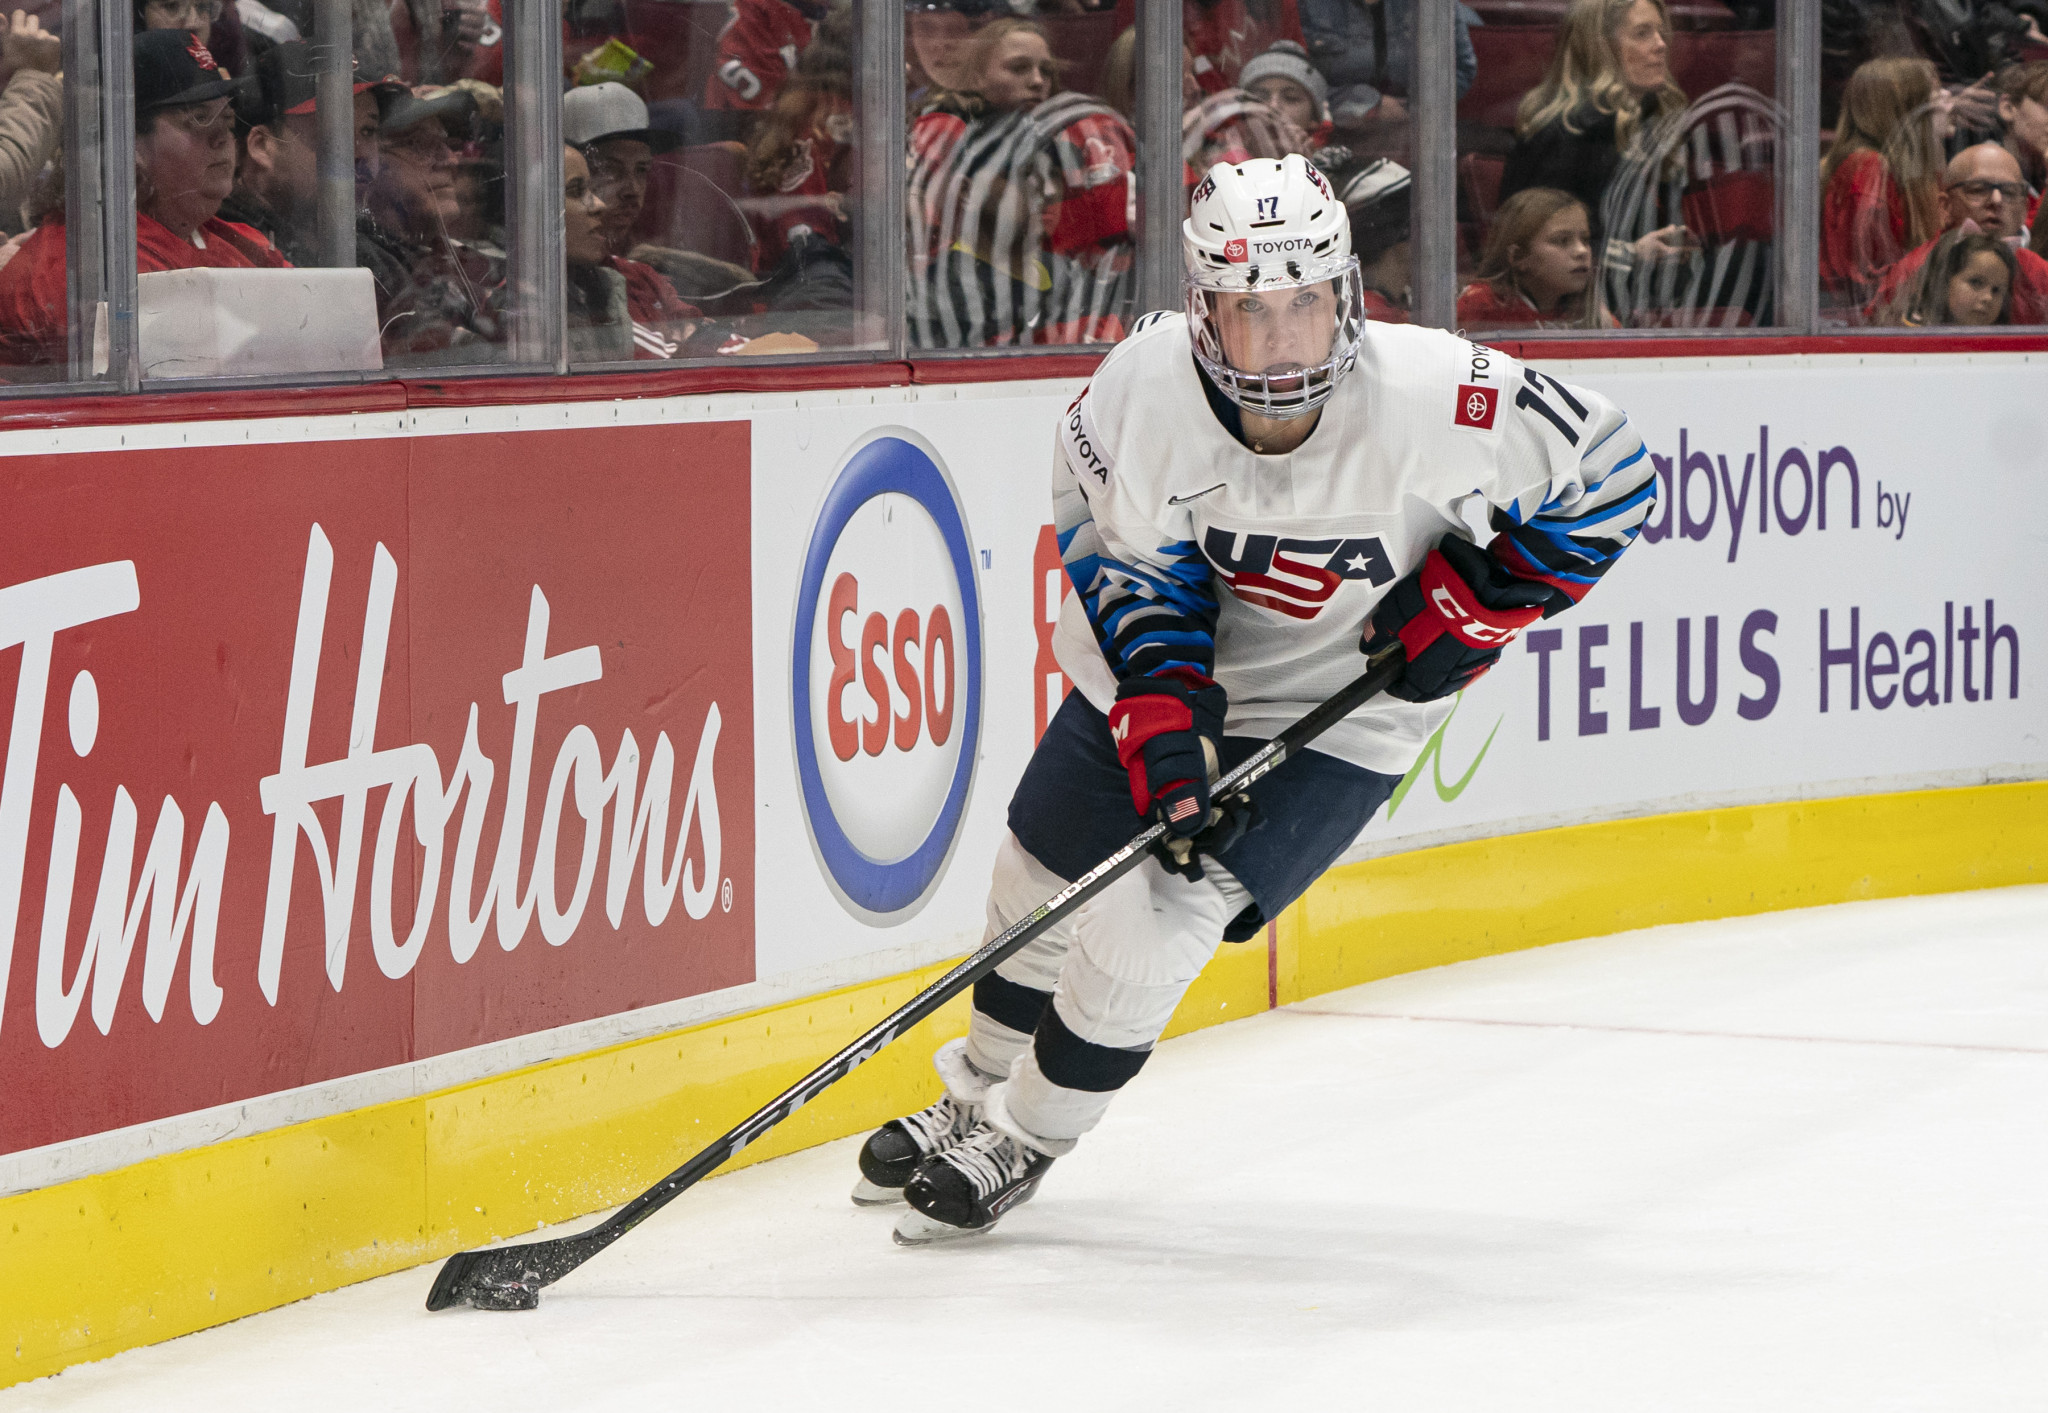 The US remained the number one IIHF ranked team in the world, despite losing to Canada in the 2021 IIHF Women's World Championship final ©Getty Images